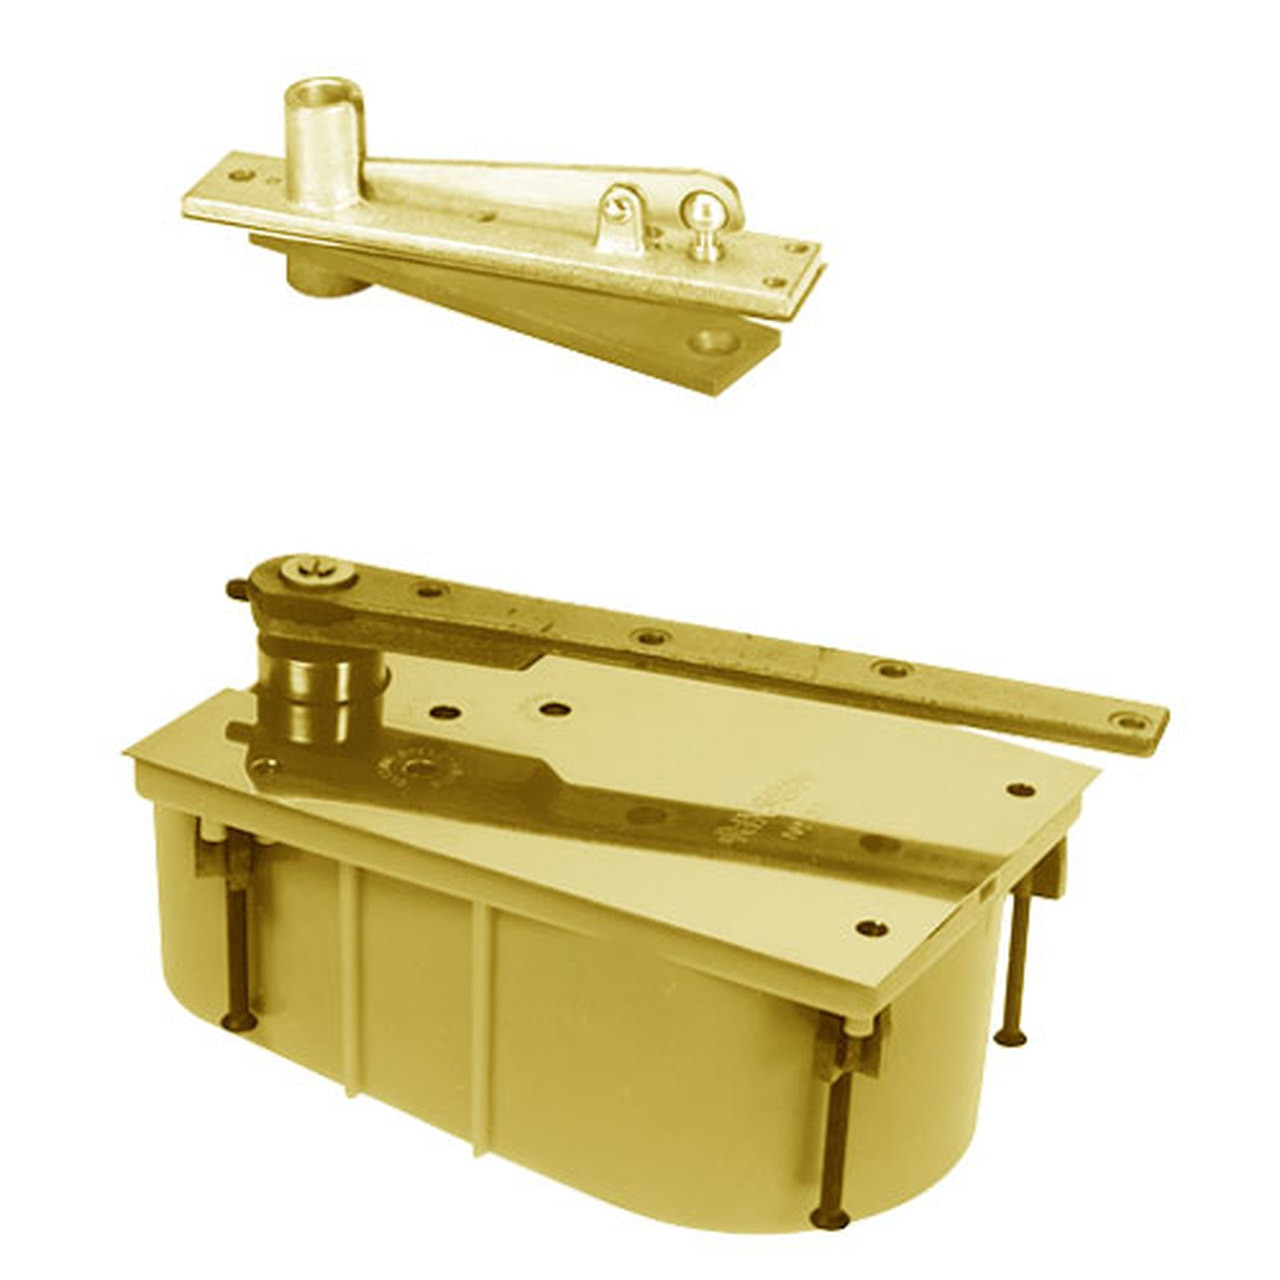 28-105S-554-LCC-RH-605 Rixson 28 Series Heavy Duty Single Acting Center Hung Floor Closer with Concealed Arm in Bright Brass Finish